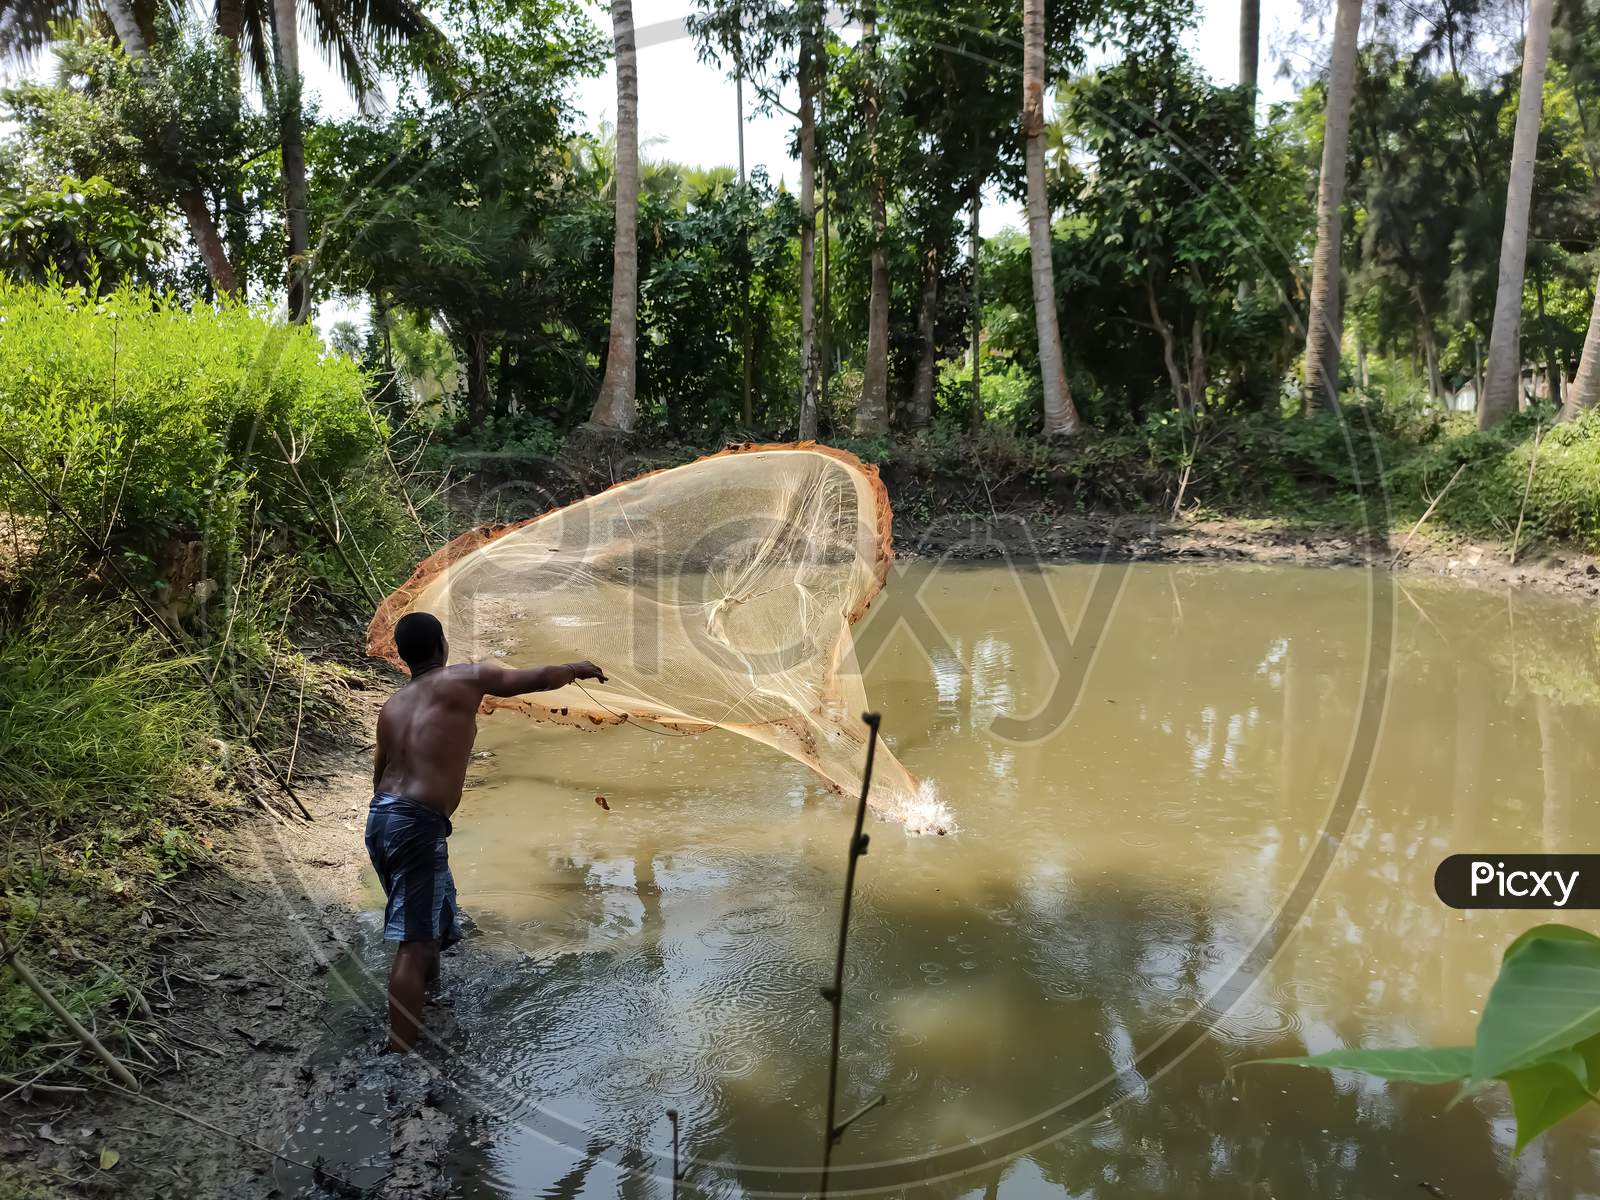 Fishing In The Village Pond With Fishing Net, Bakultala, West Bengal, India